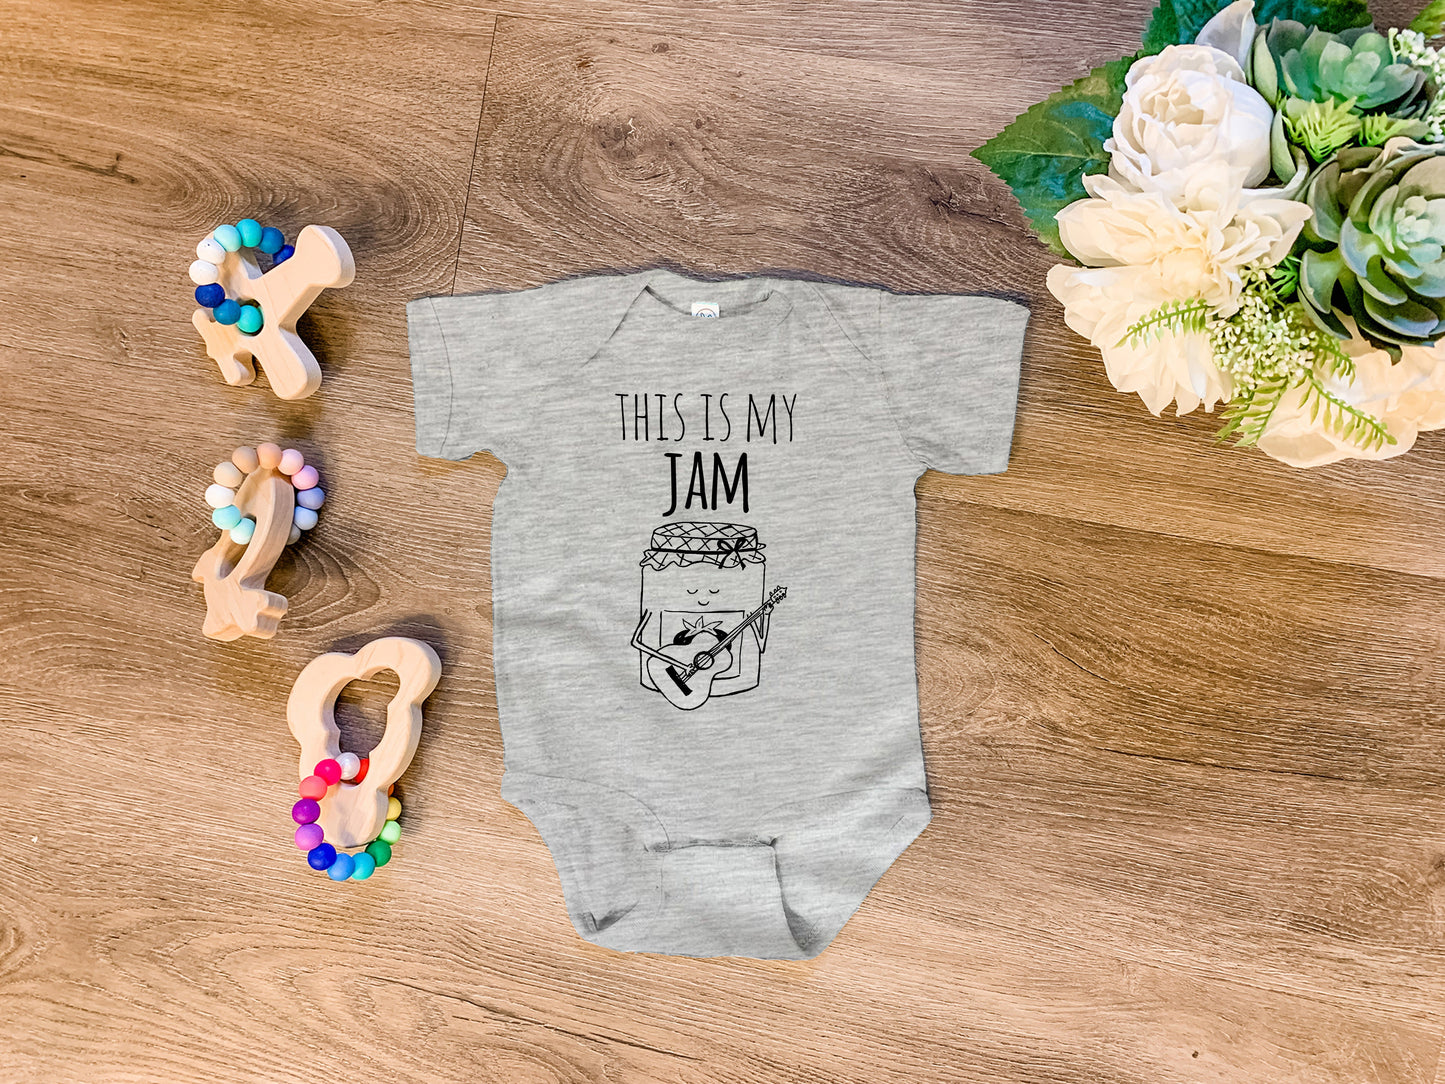 This Is My Jam - Onesie - Heather Gray, Chill, or Lavender